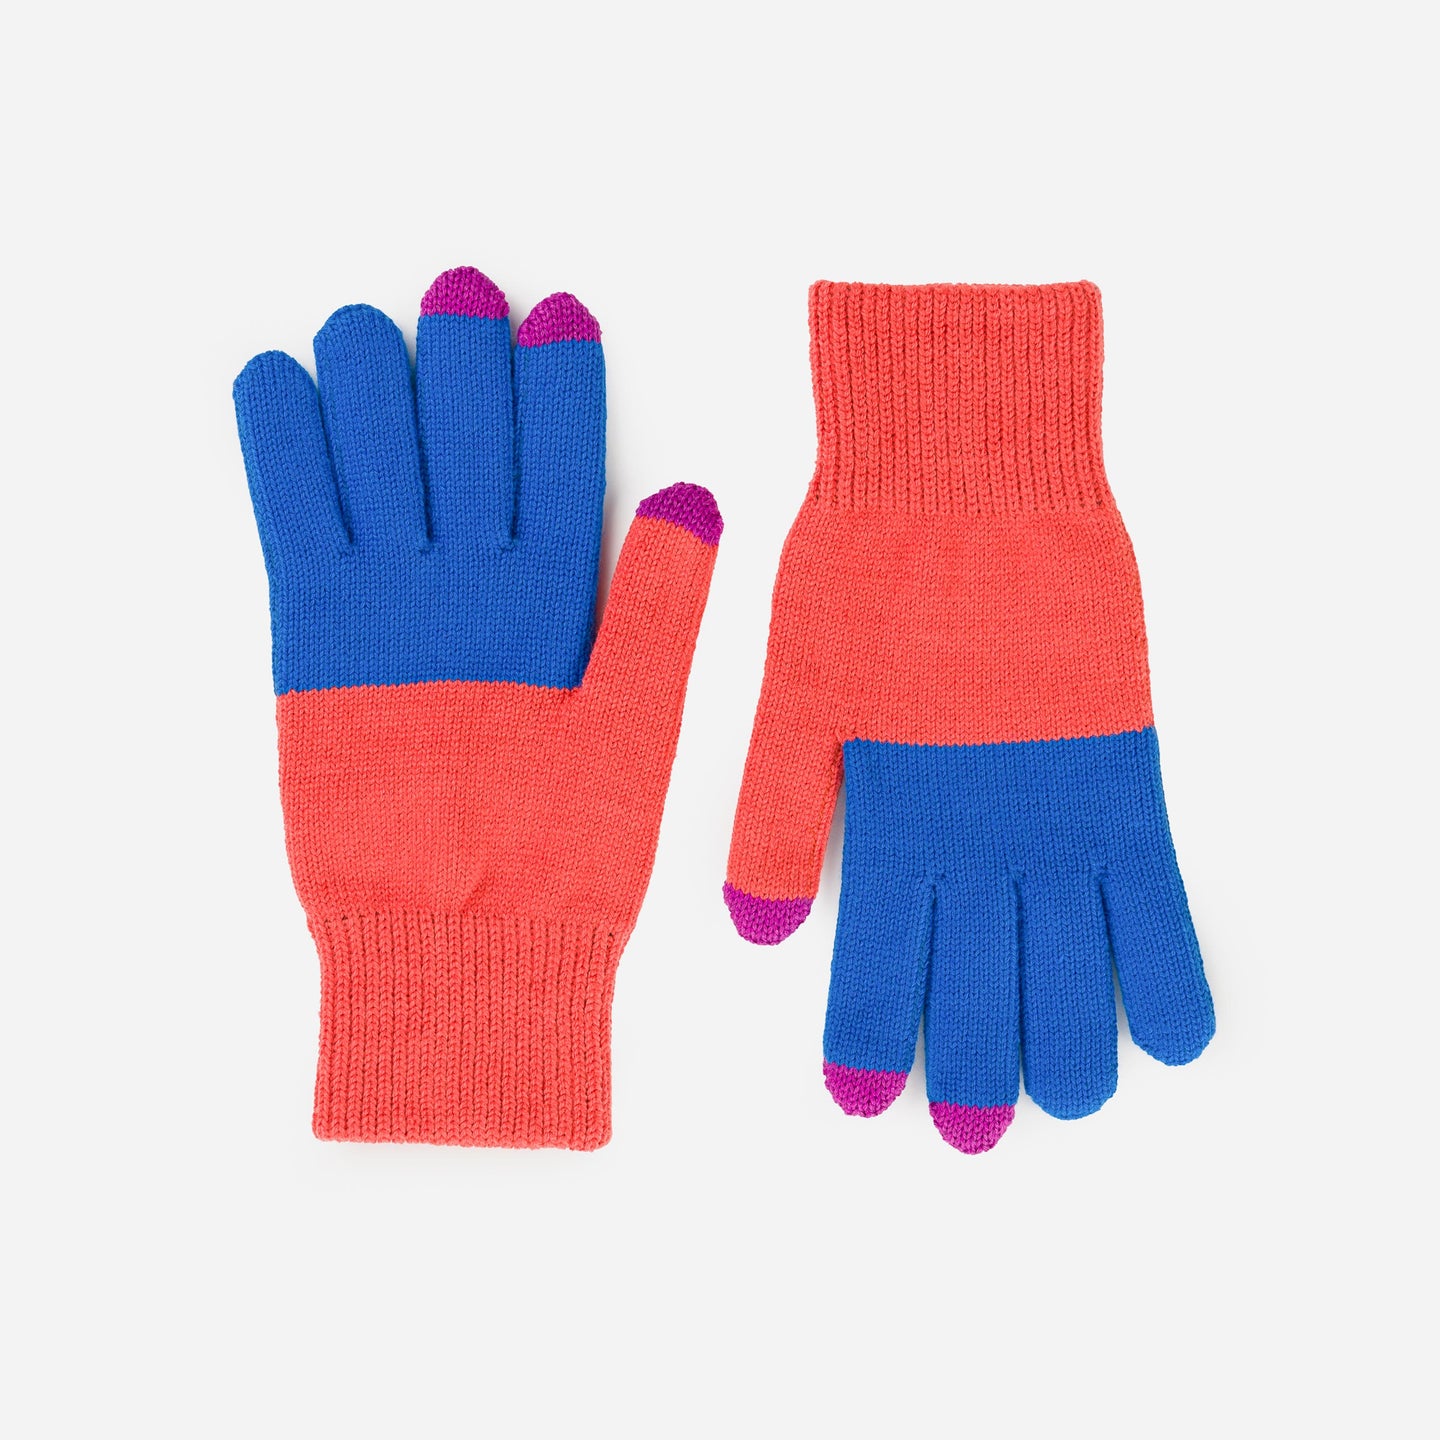 Colorblock Knit Touchscreen One Size Glove Colorful Fingertips Colorful Holiday Gift